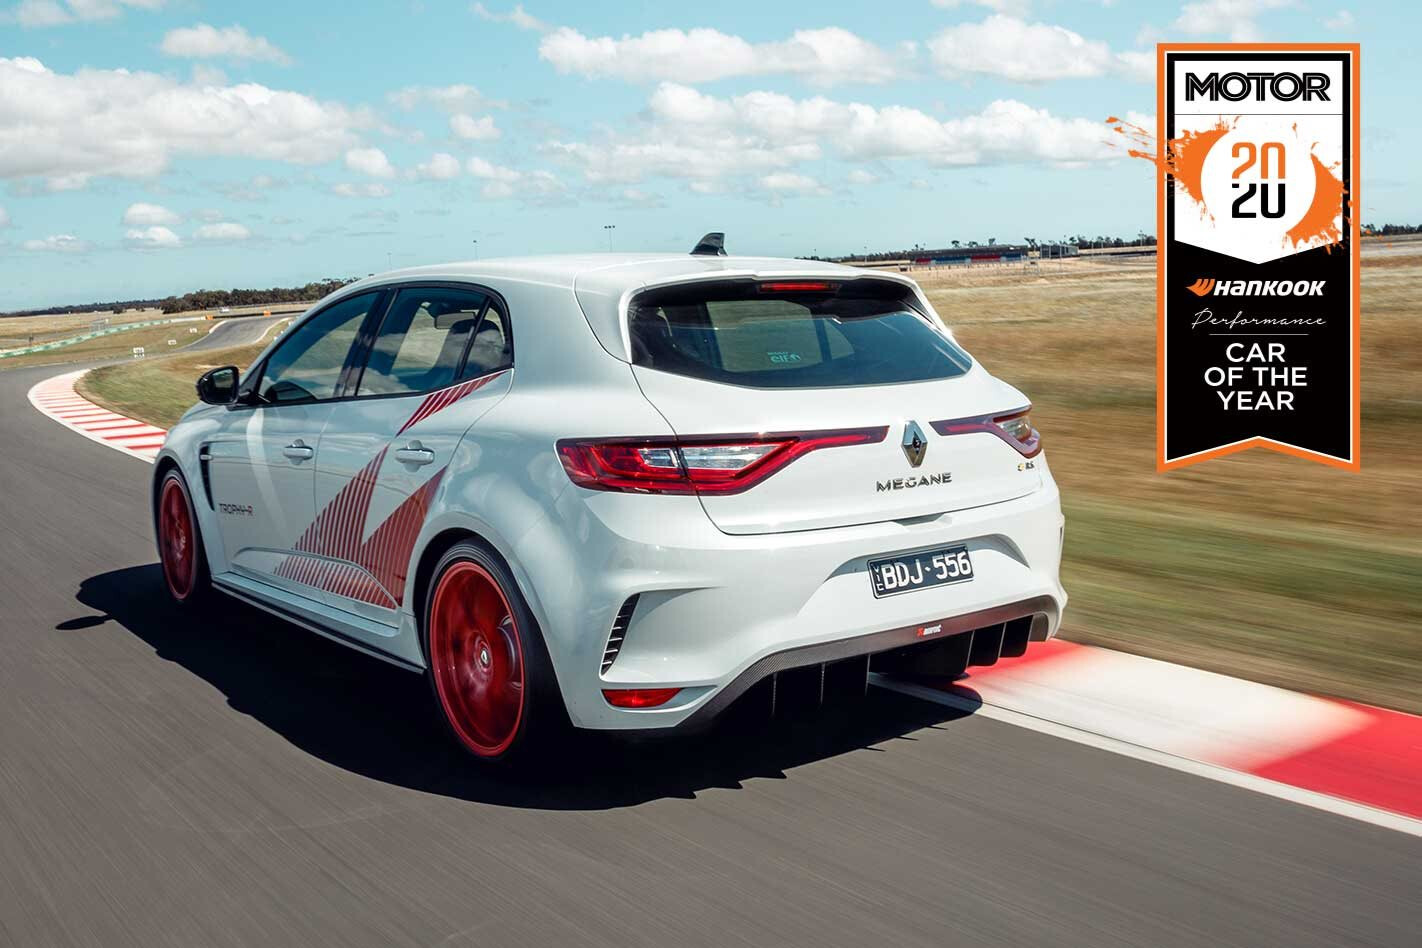 PCOTY 2020: Renault Megane RS Trophy-R - 5th Place